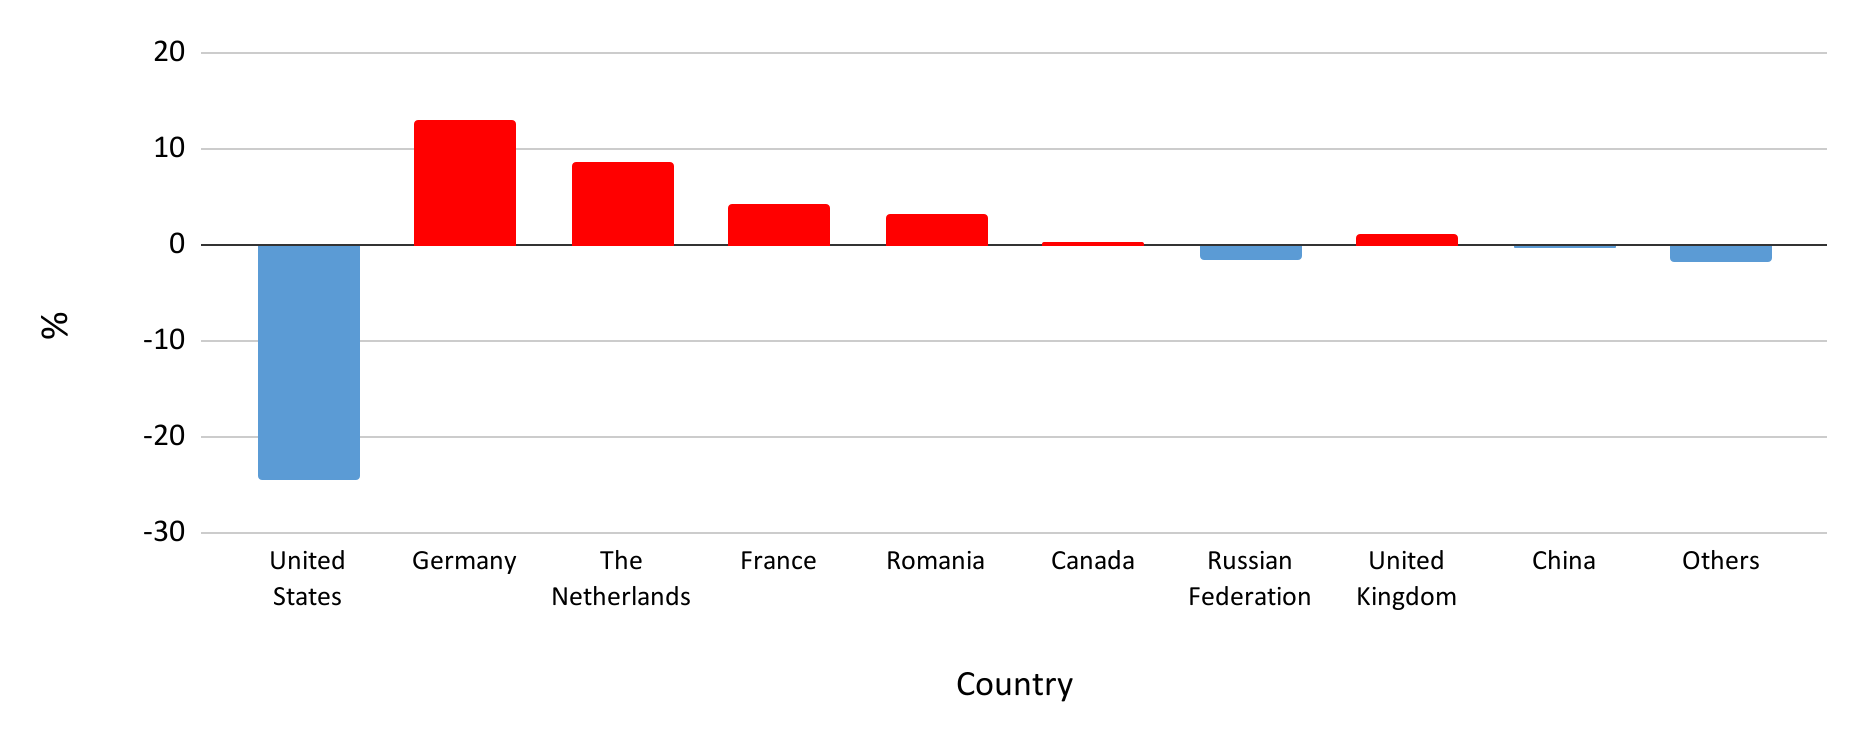 Bar chart showing percentage change in location of observed attacks. United States = >20% decrease, Germany = >10% increase, The Netherlands = <10% increase, France = <5 increase, Romania = <5% increase, Canada = ~1% increase, Russian Federation = >1% decrease, United Kingdom = >1% increase, China = <1% decrease, Others = >1% decrease